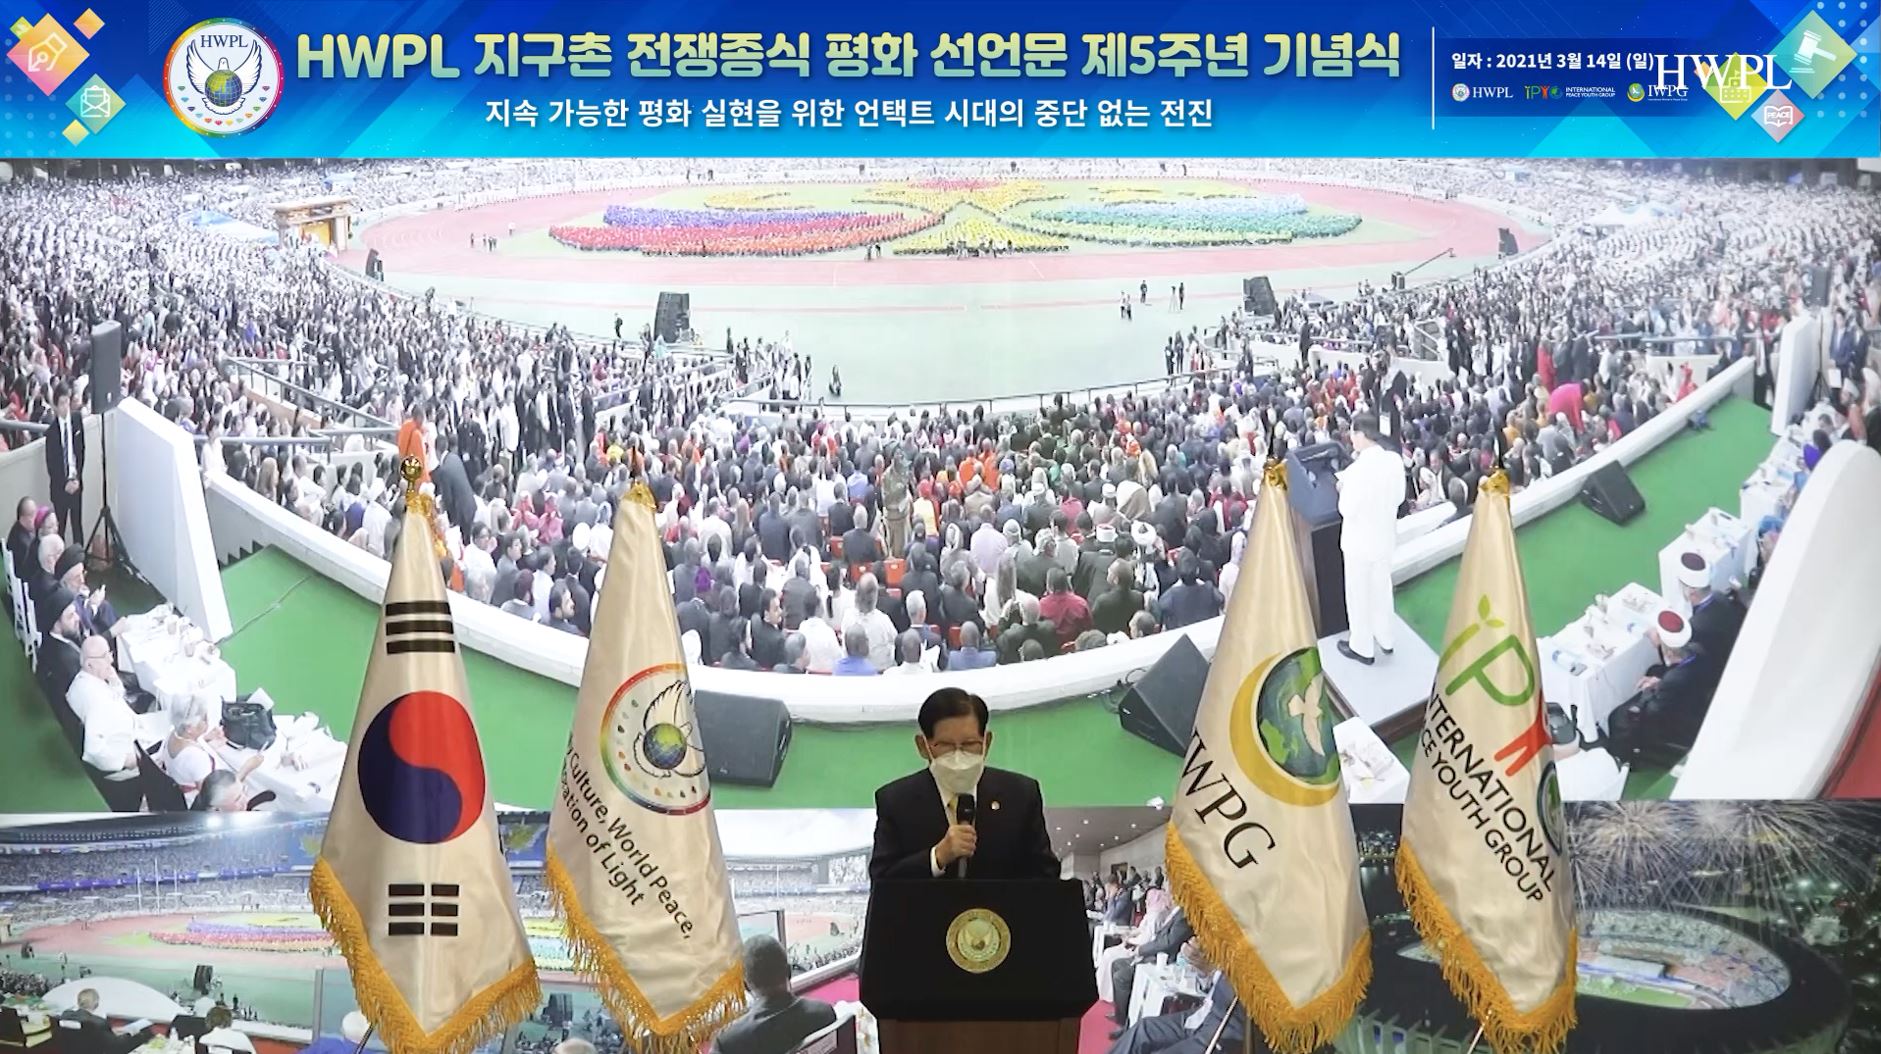 Chairman Man Hee Lee of HWPL addressing at the HWPL s 5th Annual Commemoration of the DPCW